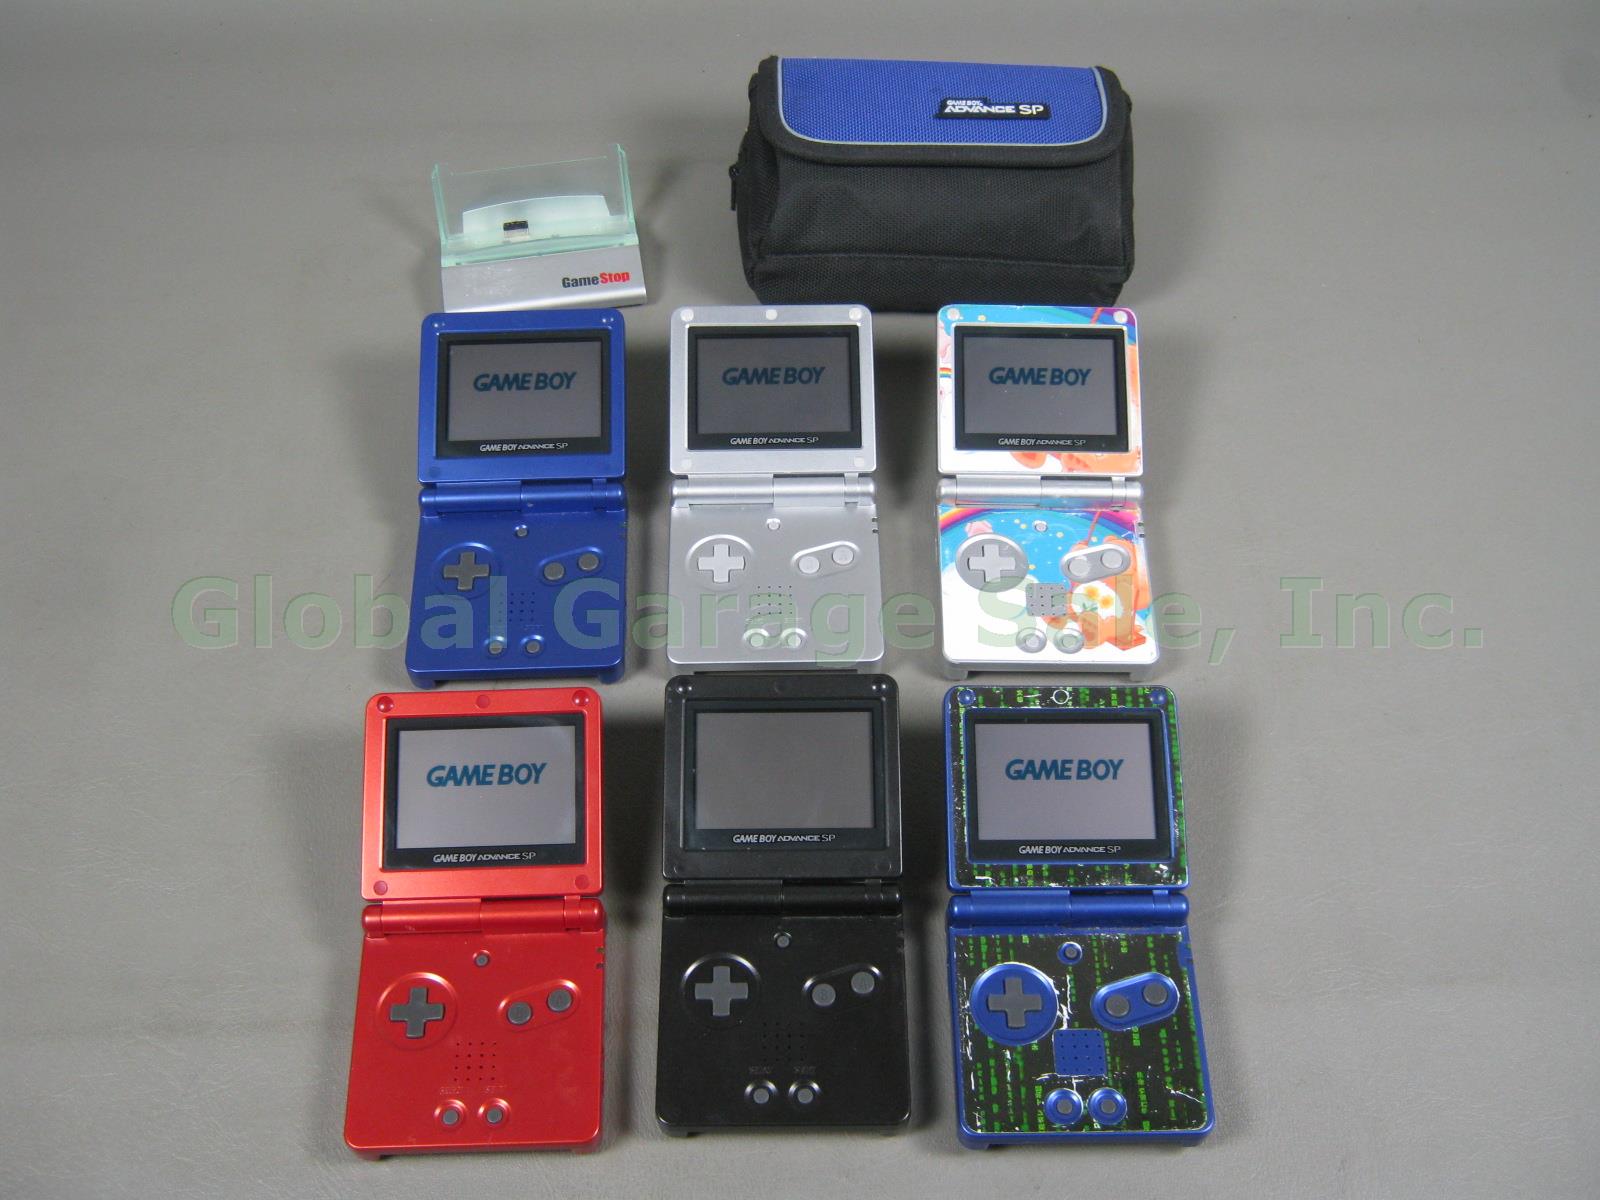 6 Nintendo Gameboy Advance GBA SP AGS-001 Consoles System Collection Bundle Lot